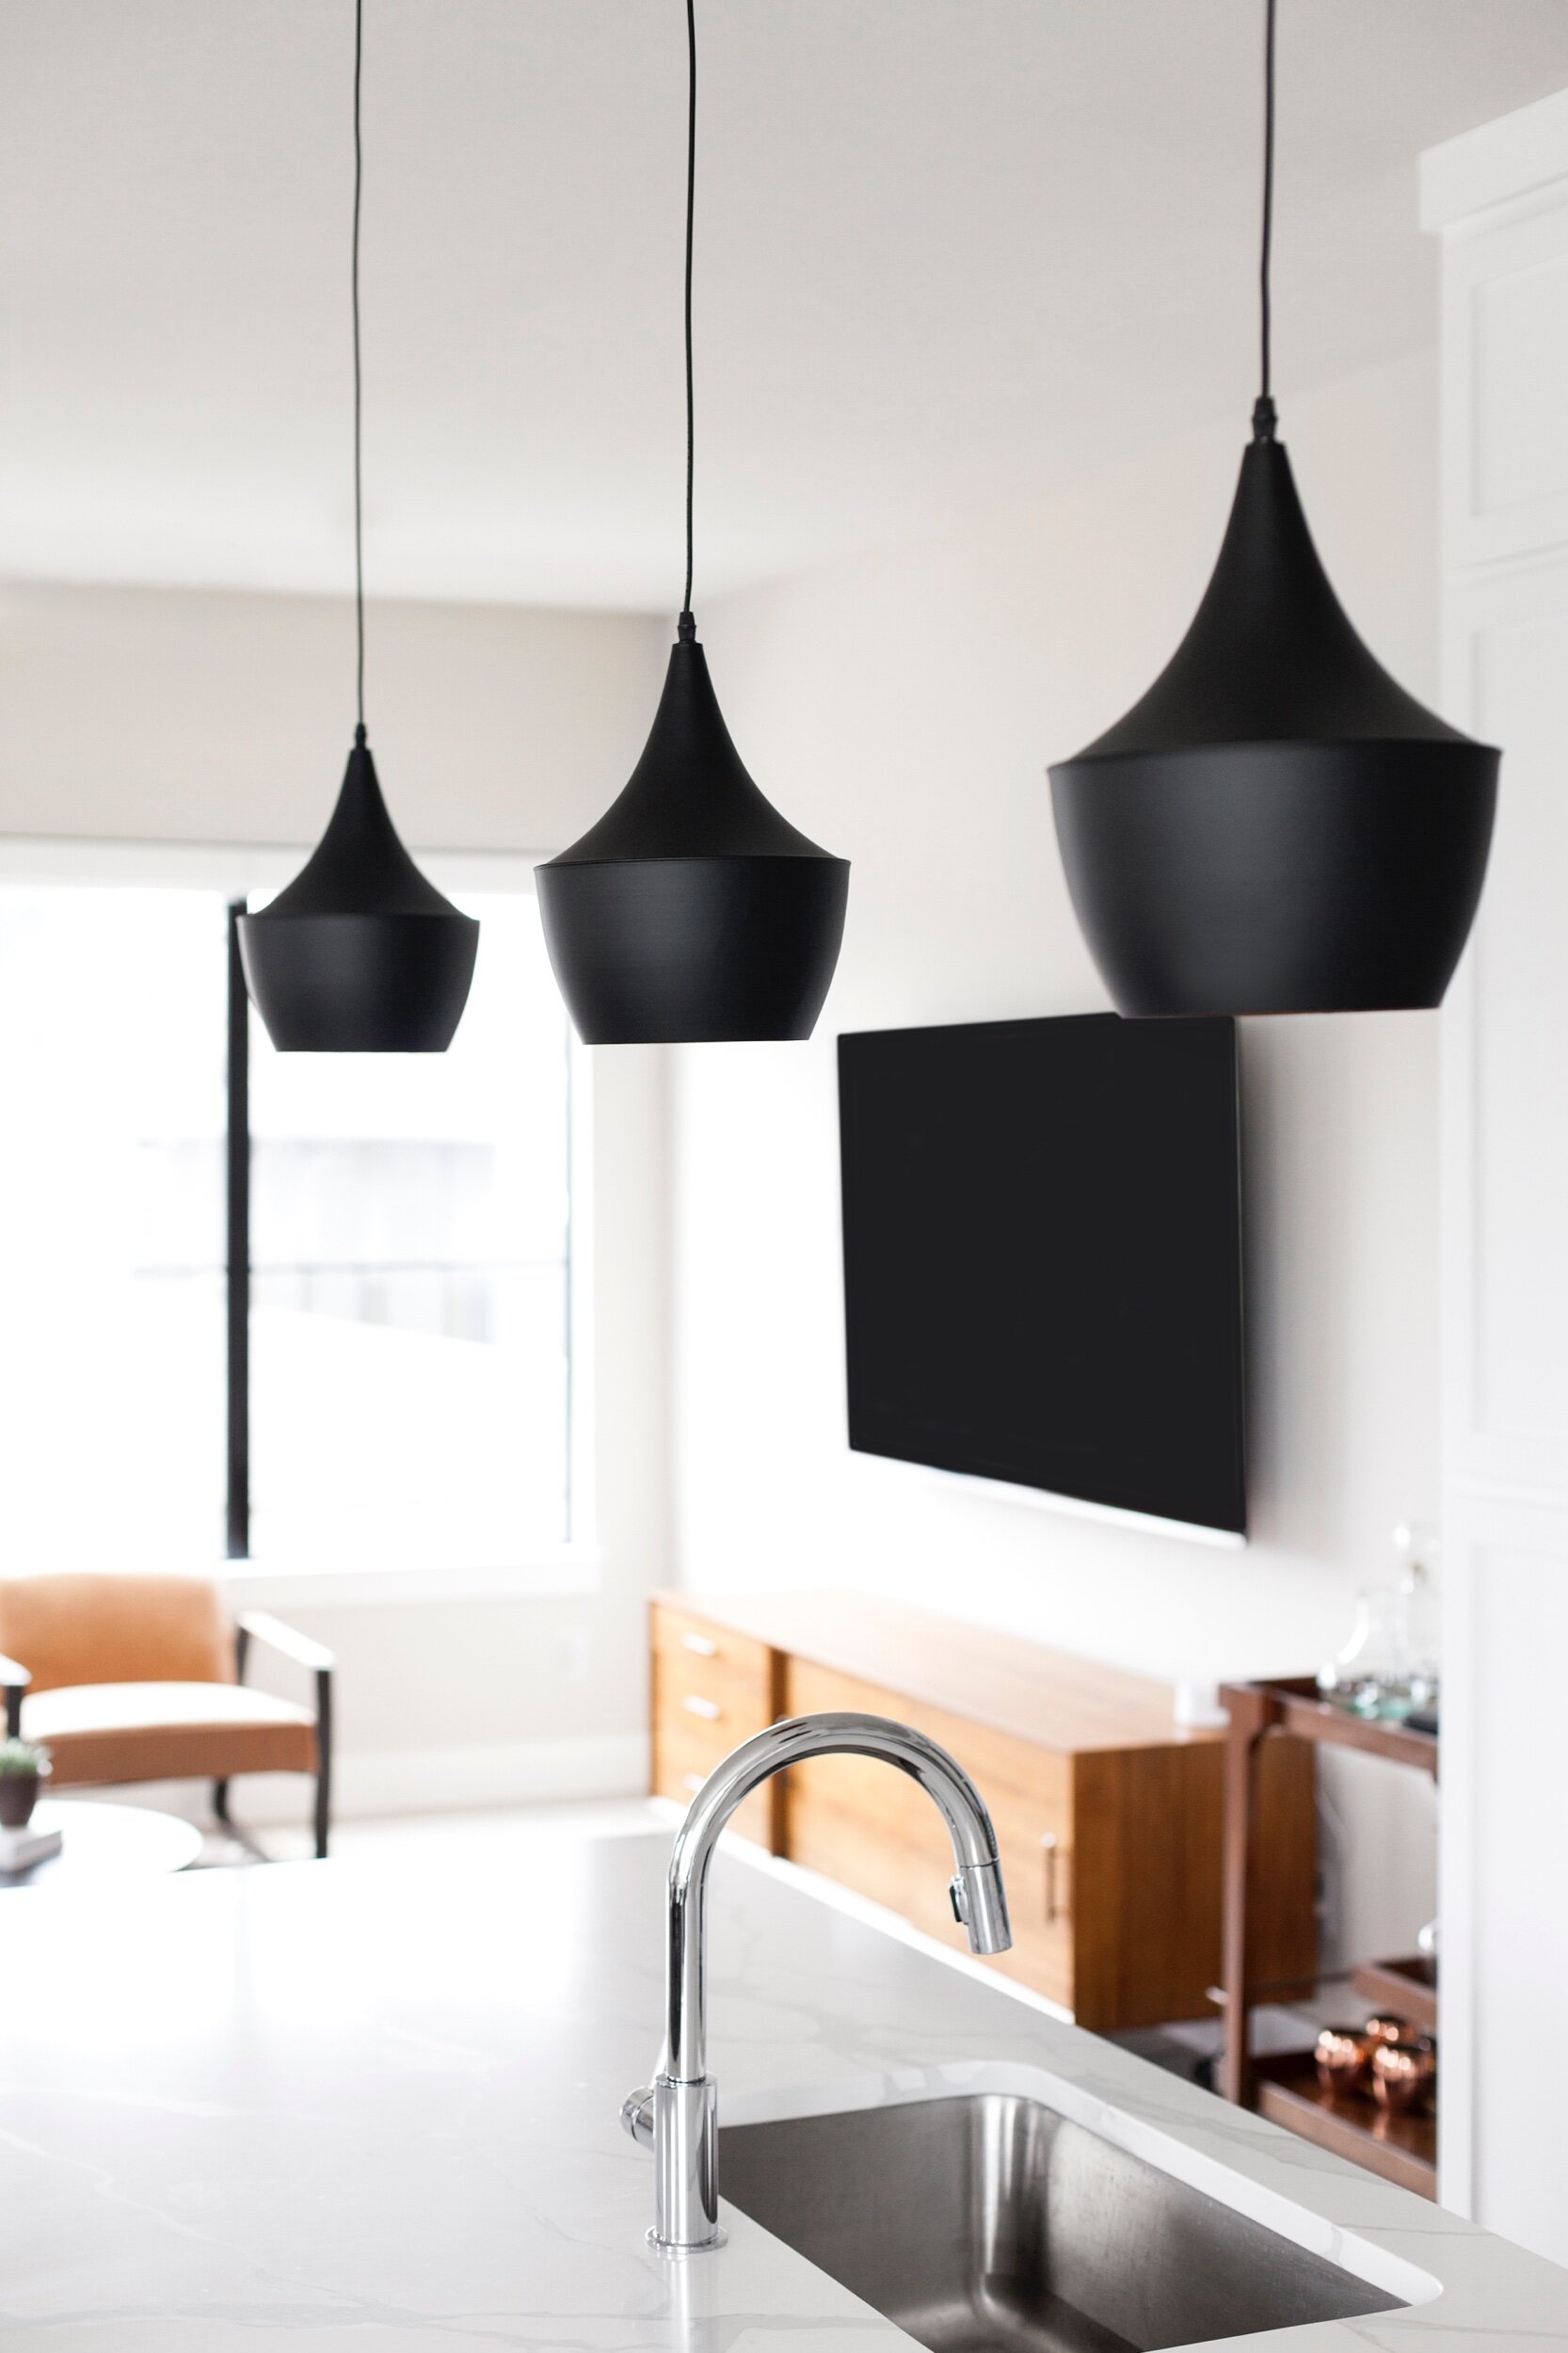 We swapped basic builder pendants for these dramatic beauties over at the Deere Project. Photo by Matti Gresham.